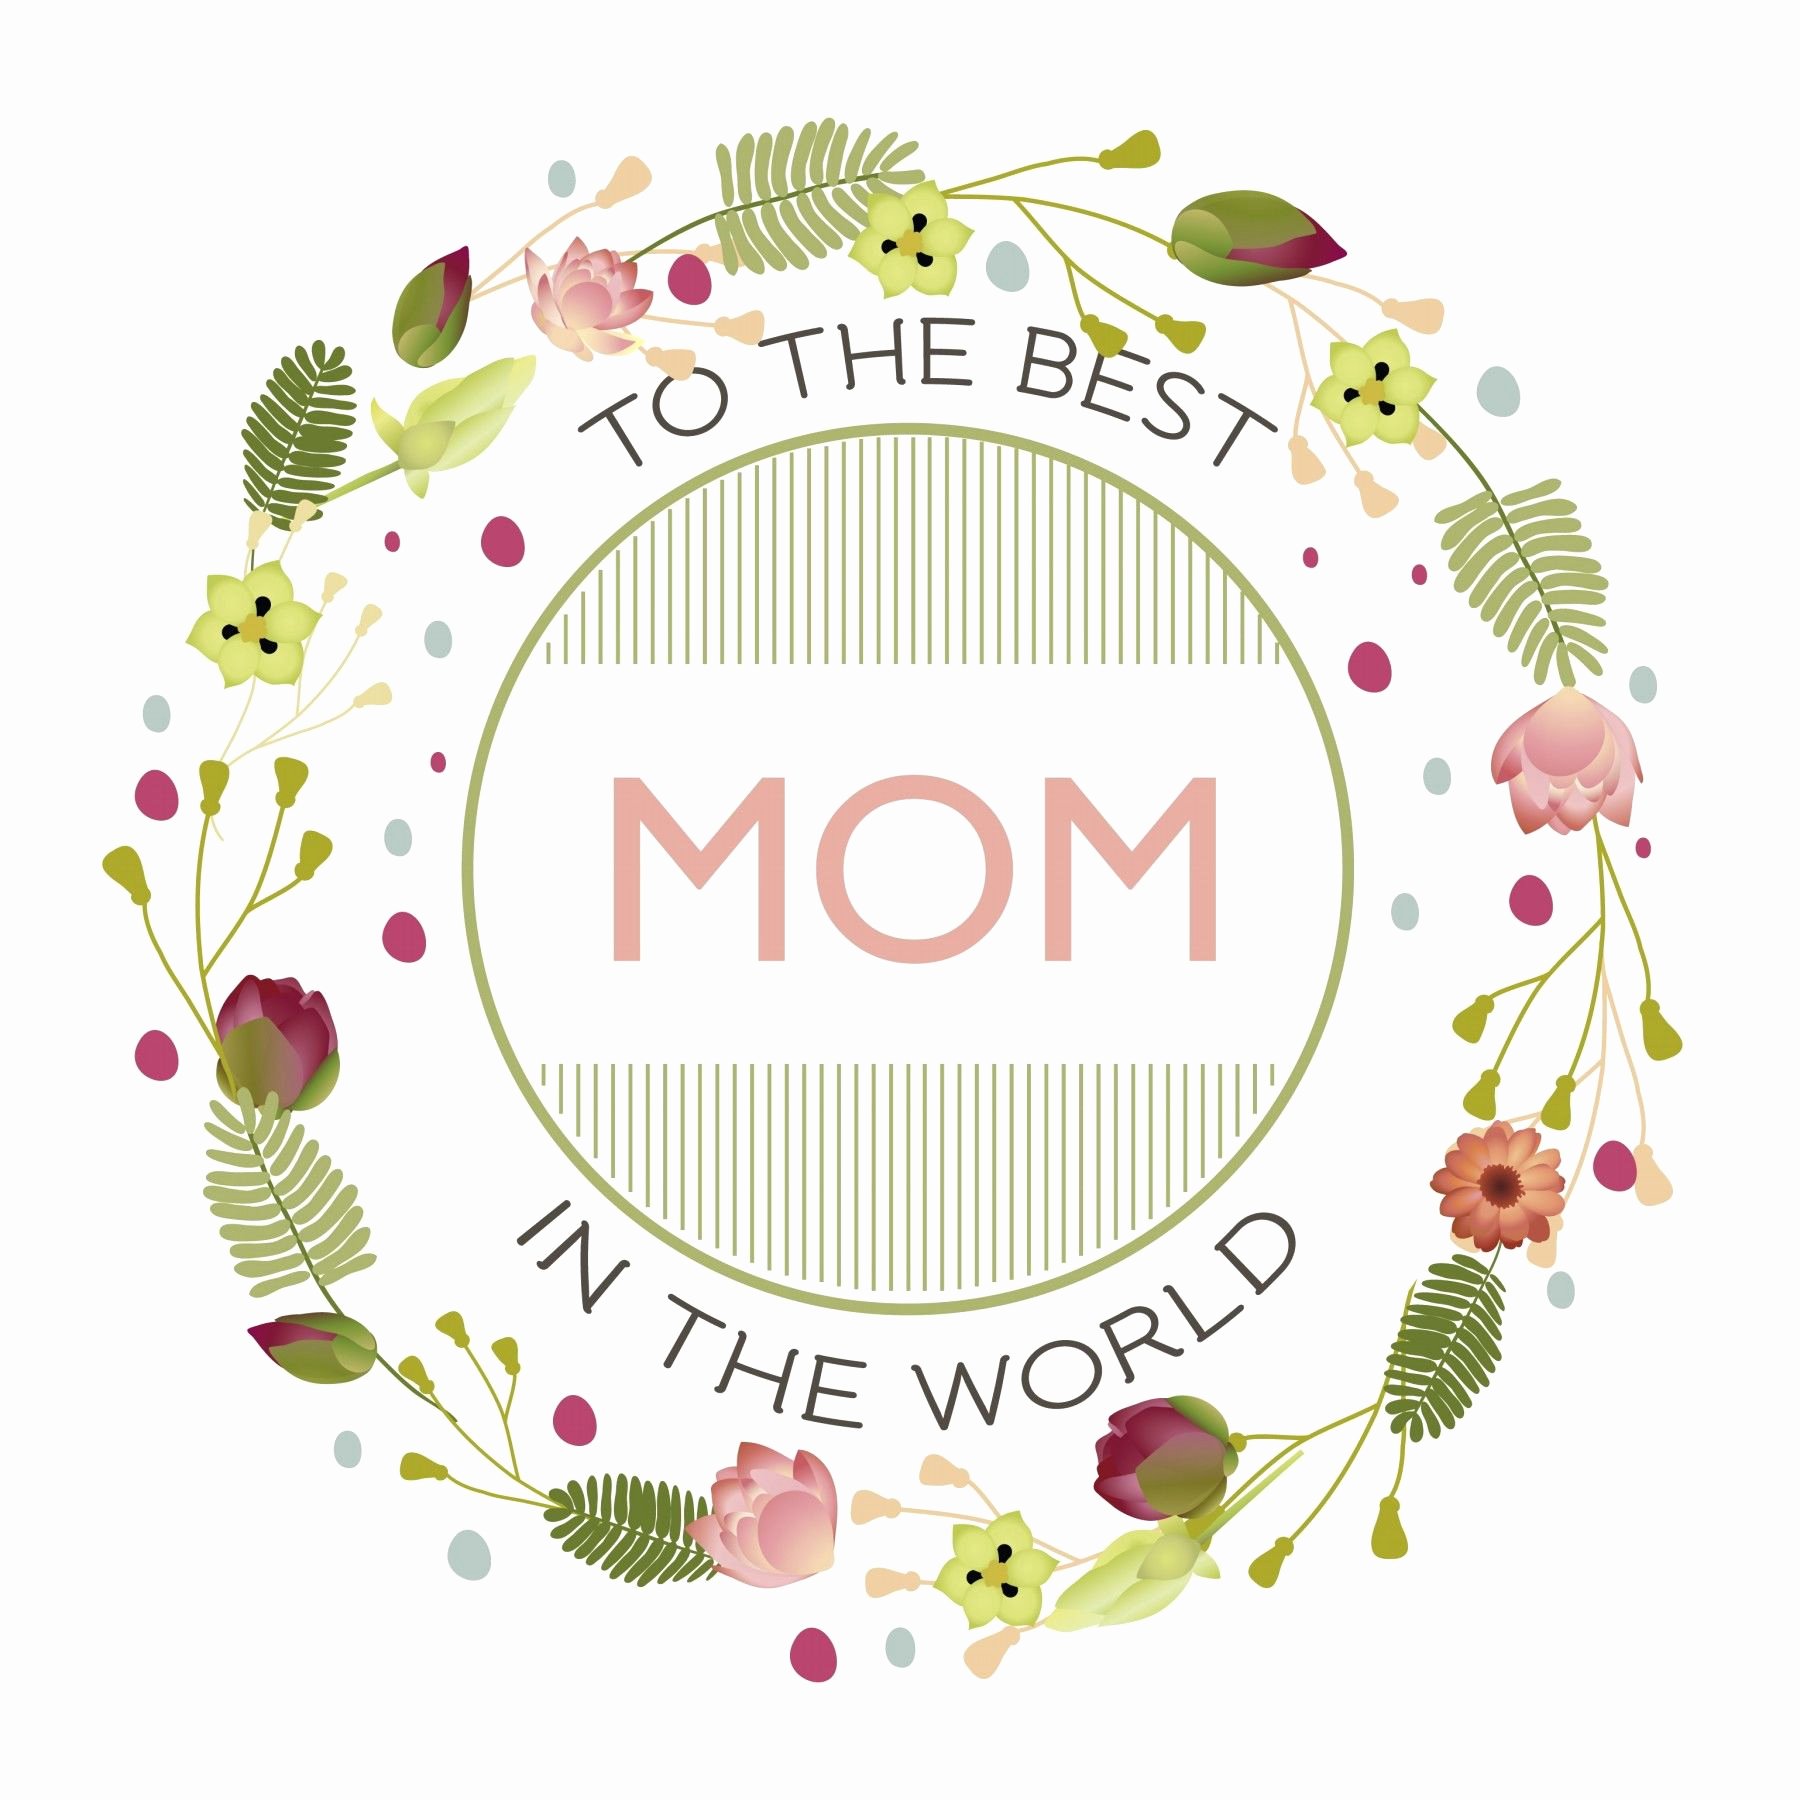 Best Mom In the World Award Inspirational to the Best Mom In the World S and